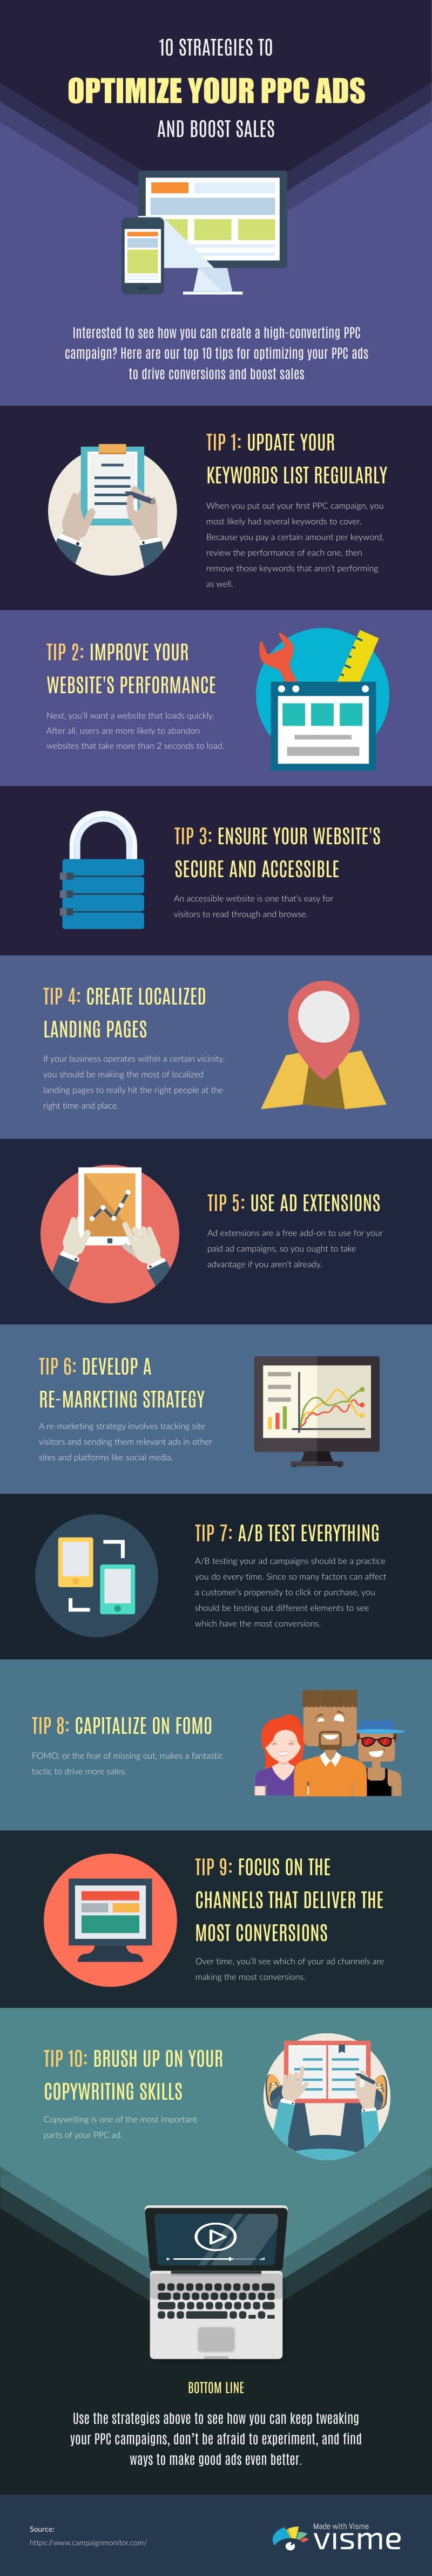 Here's a handy infographic to help you optimize PPC ads every time.